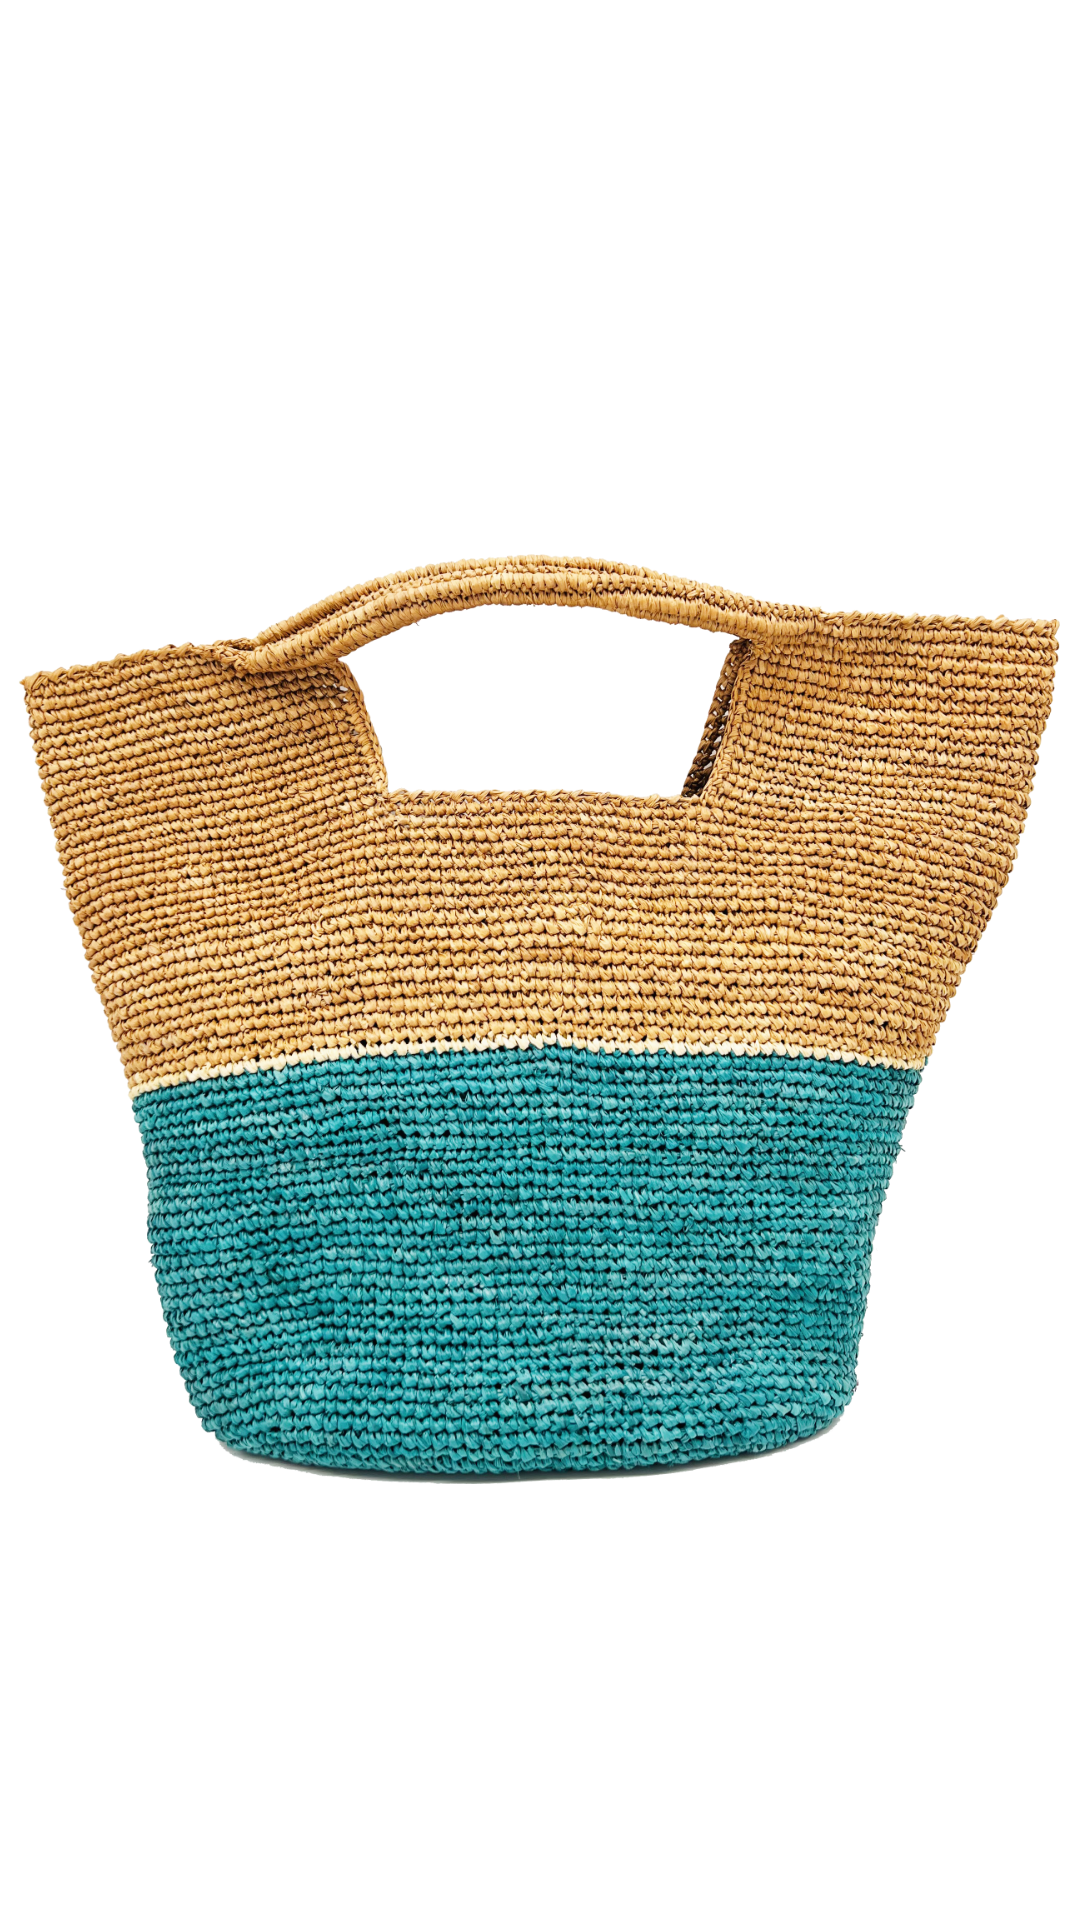 South Beach double band straw tote beach bag in beige and brown